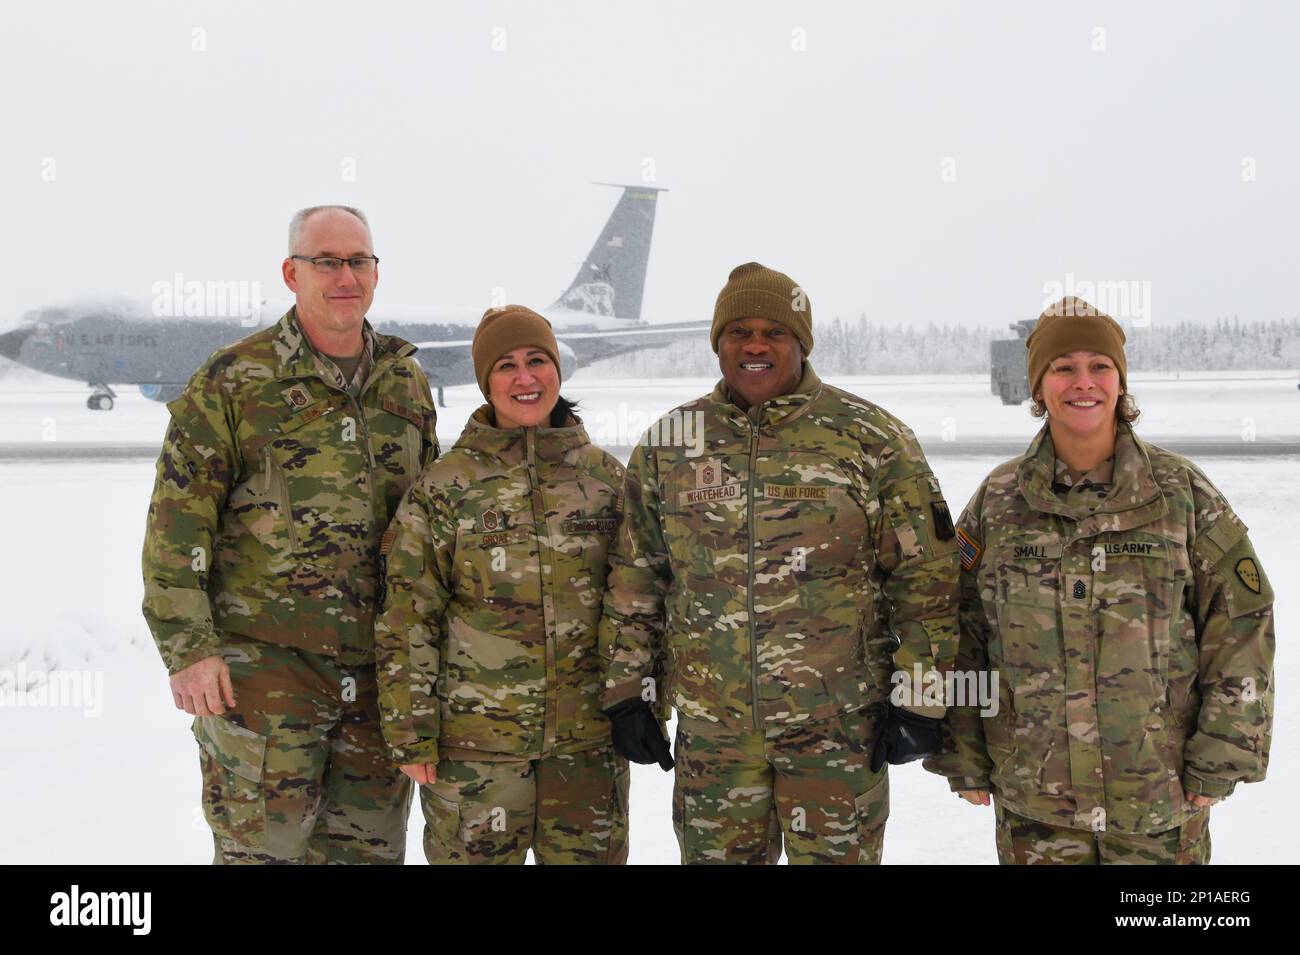 Senior Enlisted Advisor Tony Whitehead visited the Alaska Air National Guard at Eielson Air Force Base, February 2, 2023, where he was briefed on the mission of the 168th Wing. During the visit, the 168th Wing Command Chief Master Sgt. Jeffrey Ling, State Command Chief Kim Groat, SEA Whitehead, and Command Sgt. Maj. Julie Small, enlisted leader of the Alaska National Guard, pose for a photo in front of the 168th Wing KC-135s on a snowy Alaska day as they discussed arctic operations. SEA Whitehead serves as the Senior Enlisted Advisor to the Chief of the National Guard Bureau. Stock Photo